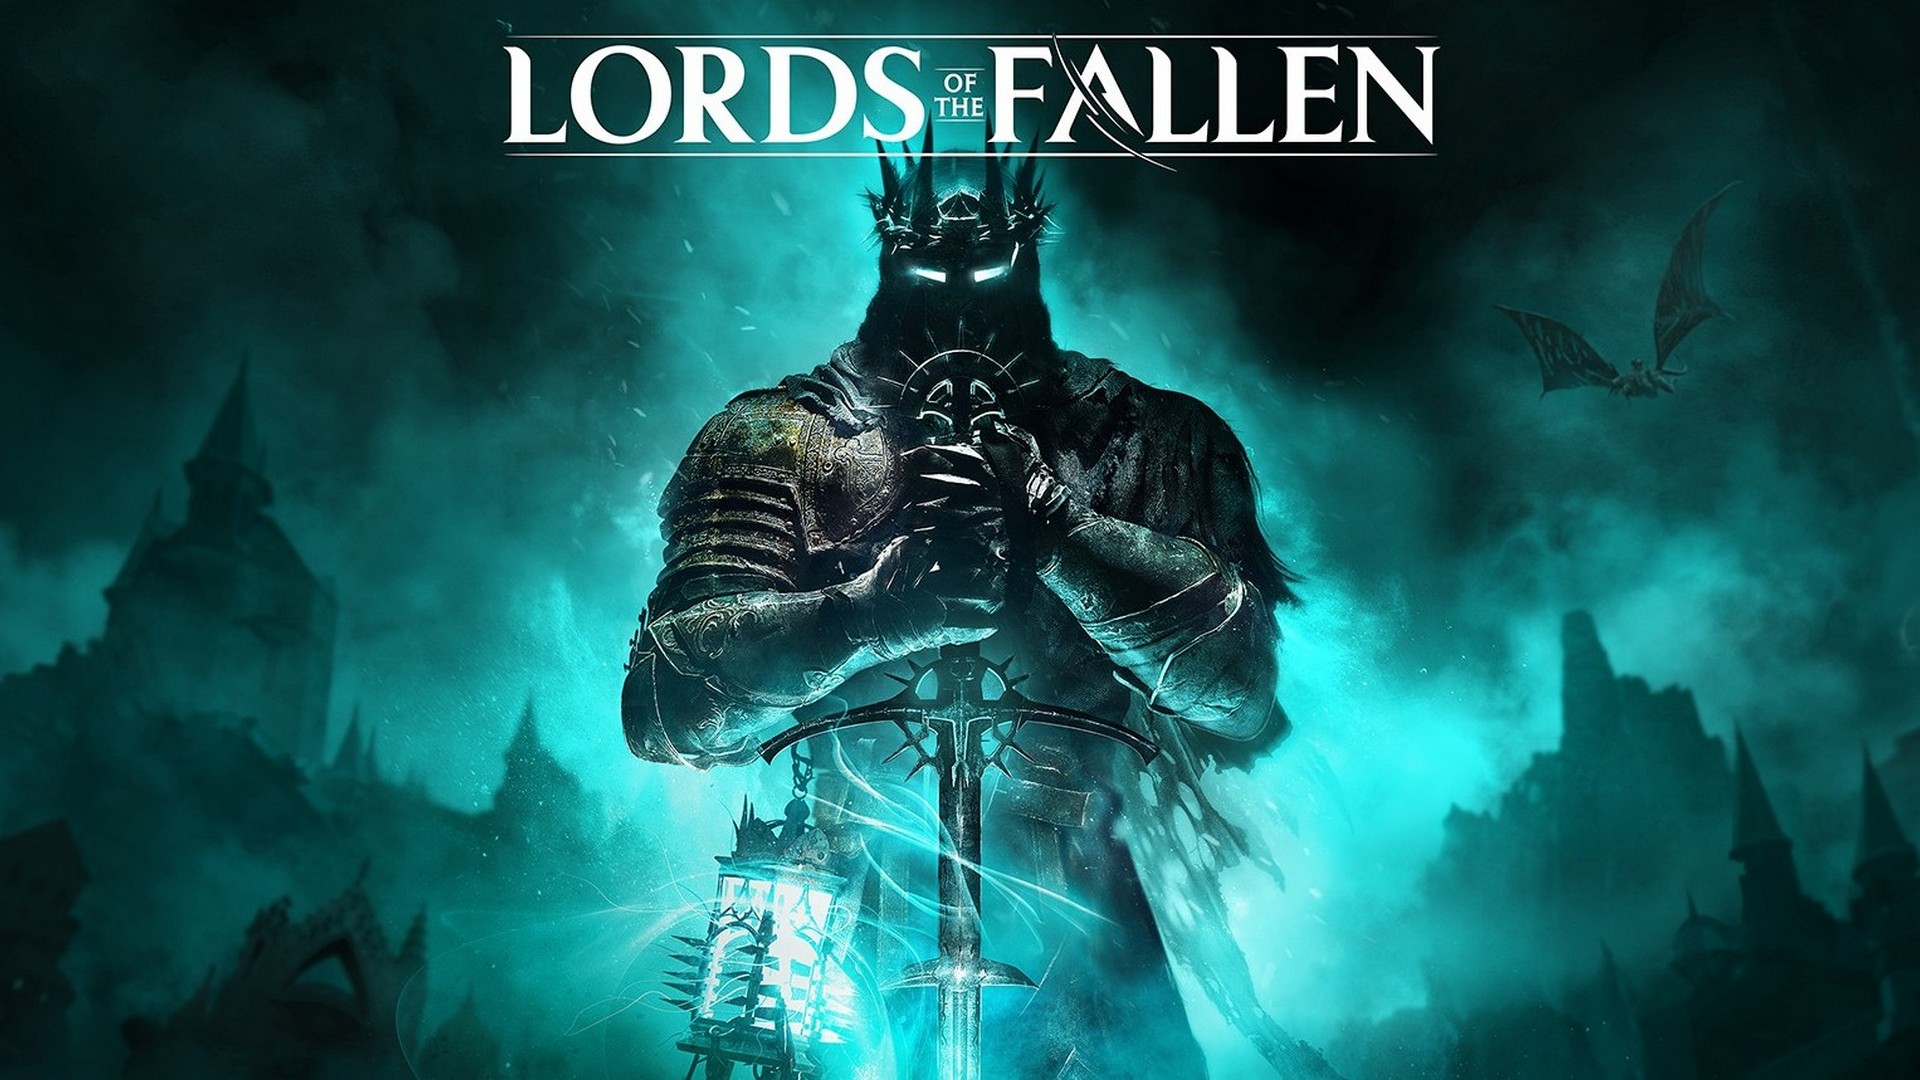 LORDS OF THE FALLEN - 'Dual Worlds' Official Gameplay Showcase 